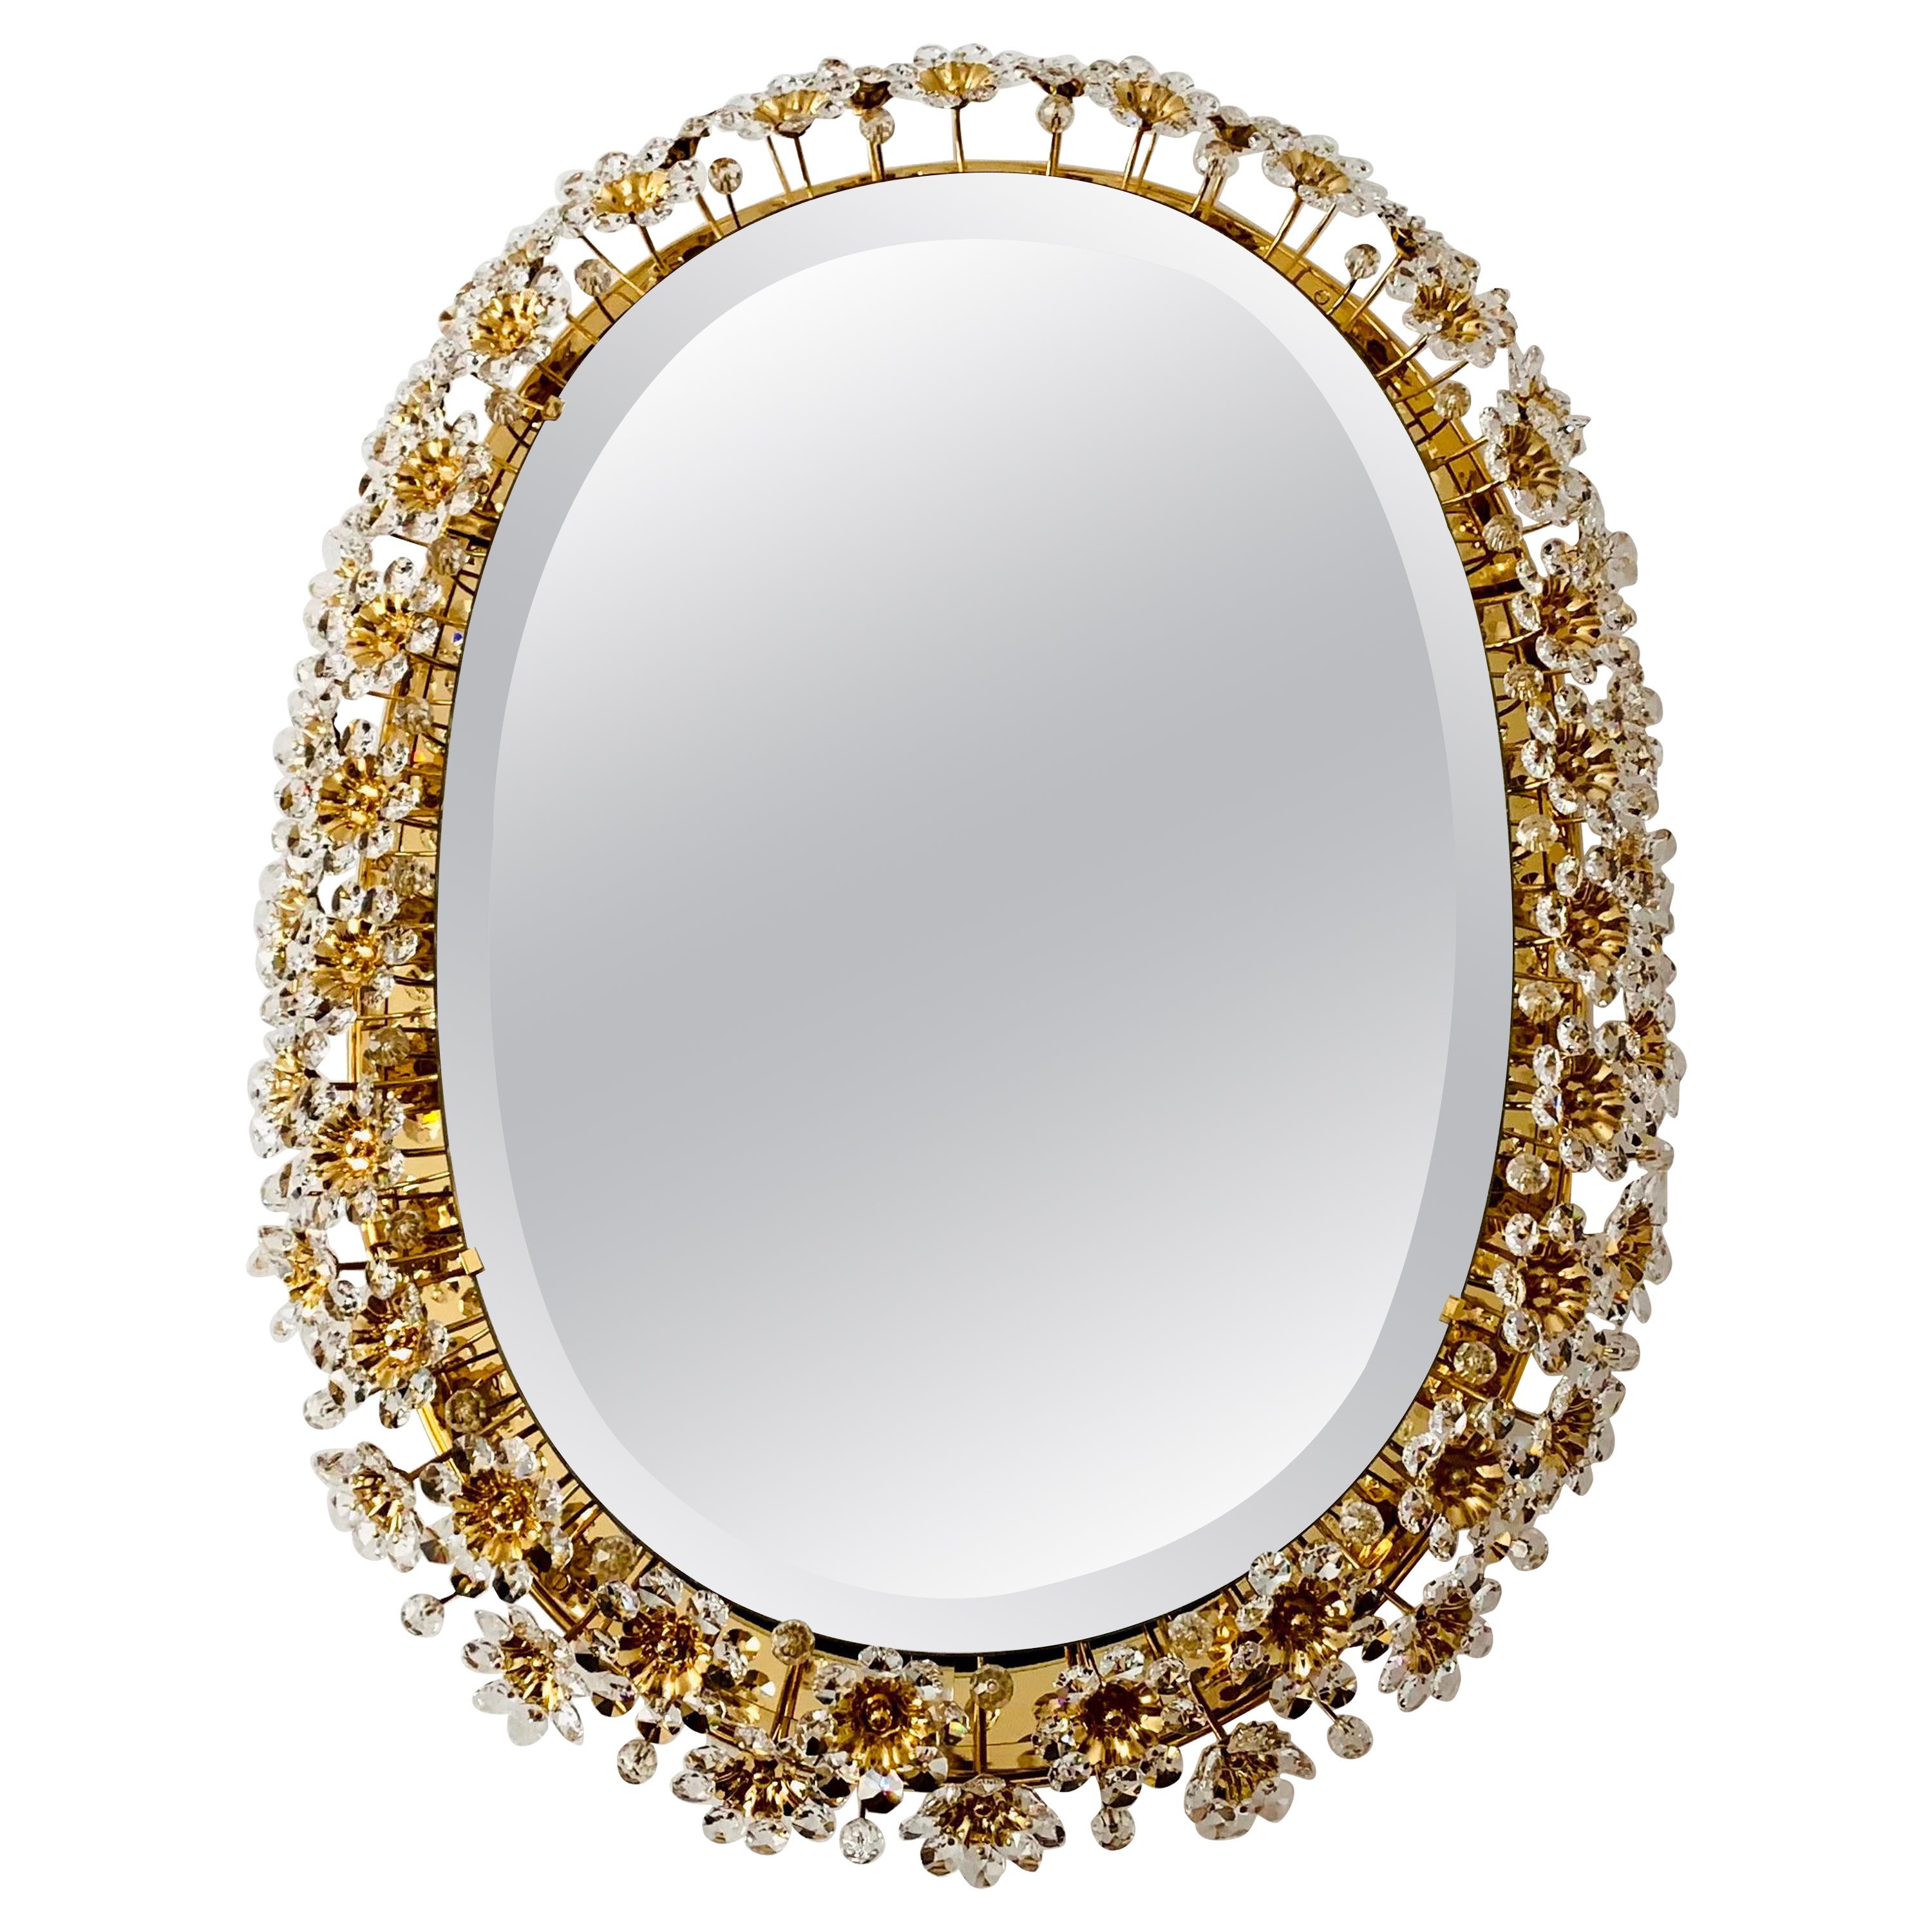 Illuminated Floral Mirror by Palwa